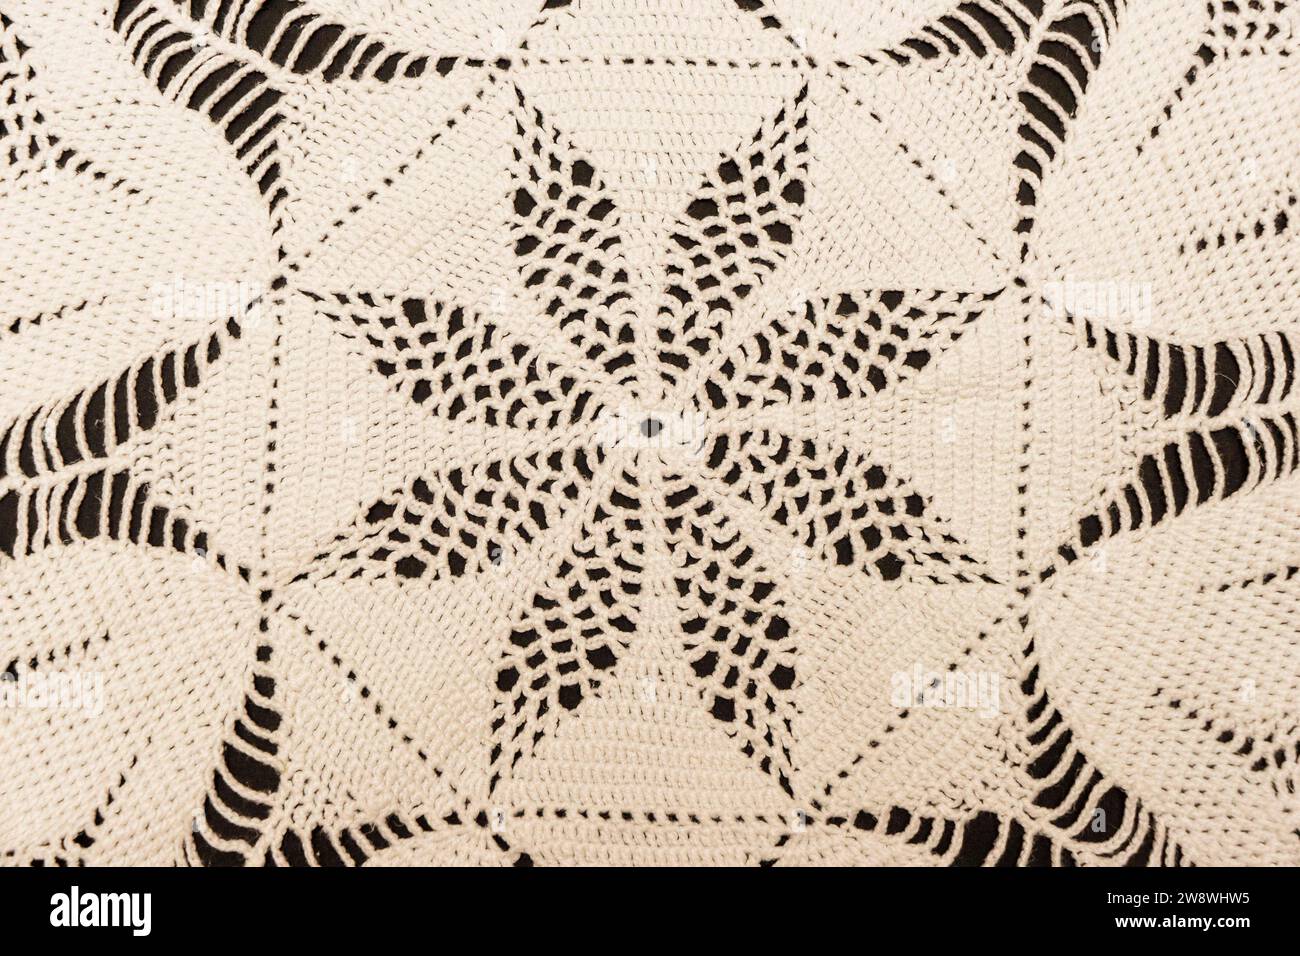 Set of White Tape Lace on a Black Background. Vintage Style. Material for  Stylish Graphic Decoration Stock Image - Image of crochet, needlework:  205129493